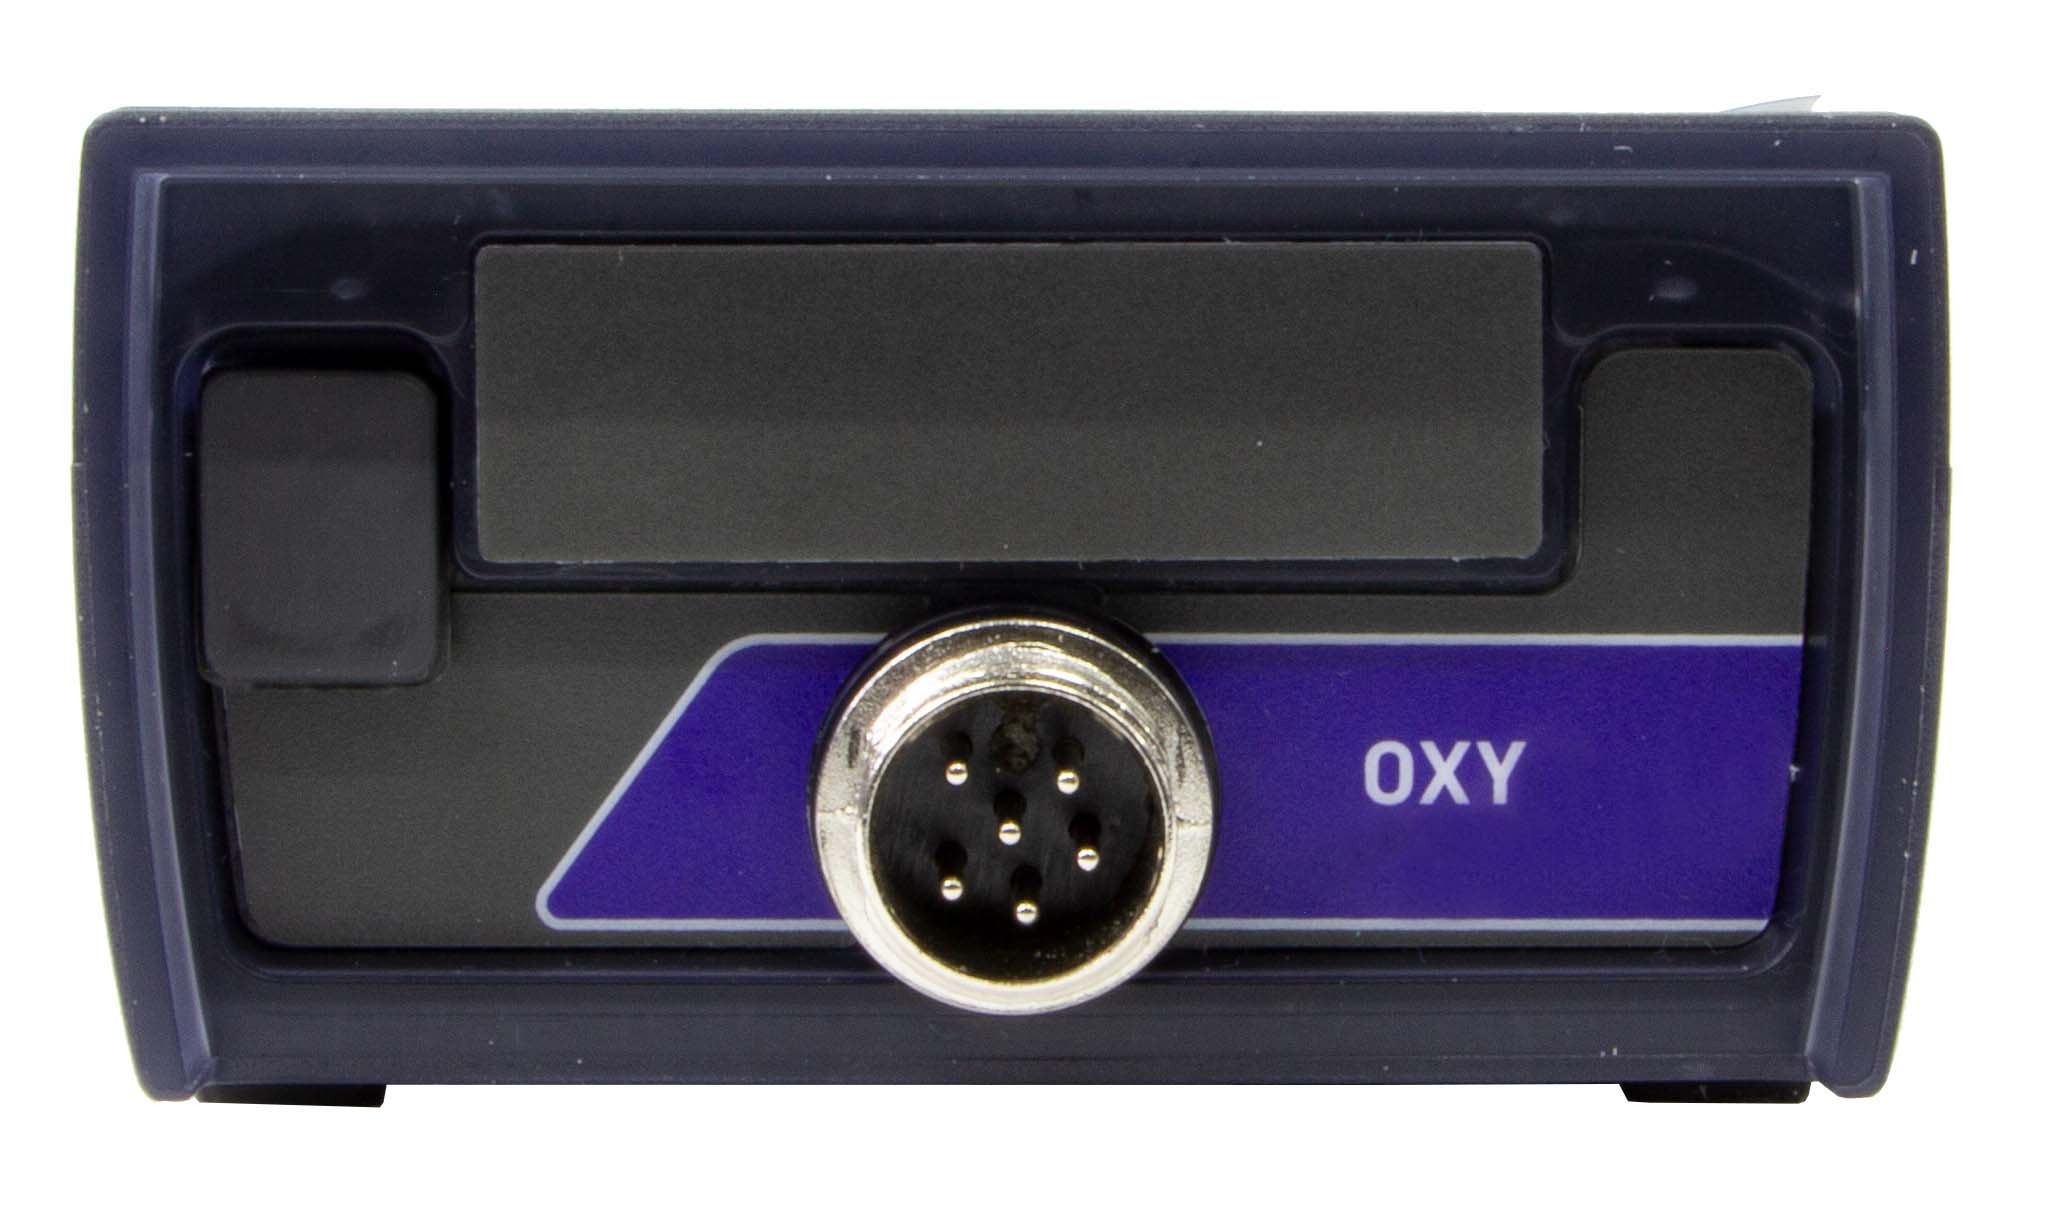 XS Oxy 70 dissolved oxygen/O2 saturation/barometric pressure/temperature meter in case including optical OXY LDO70 oxygen sensor